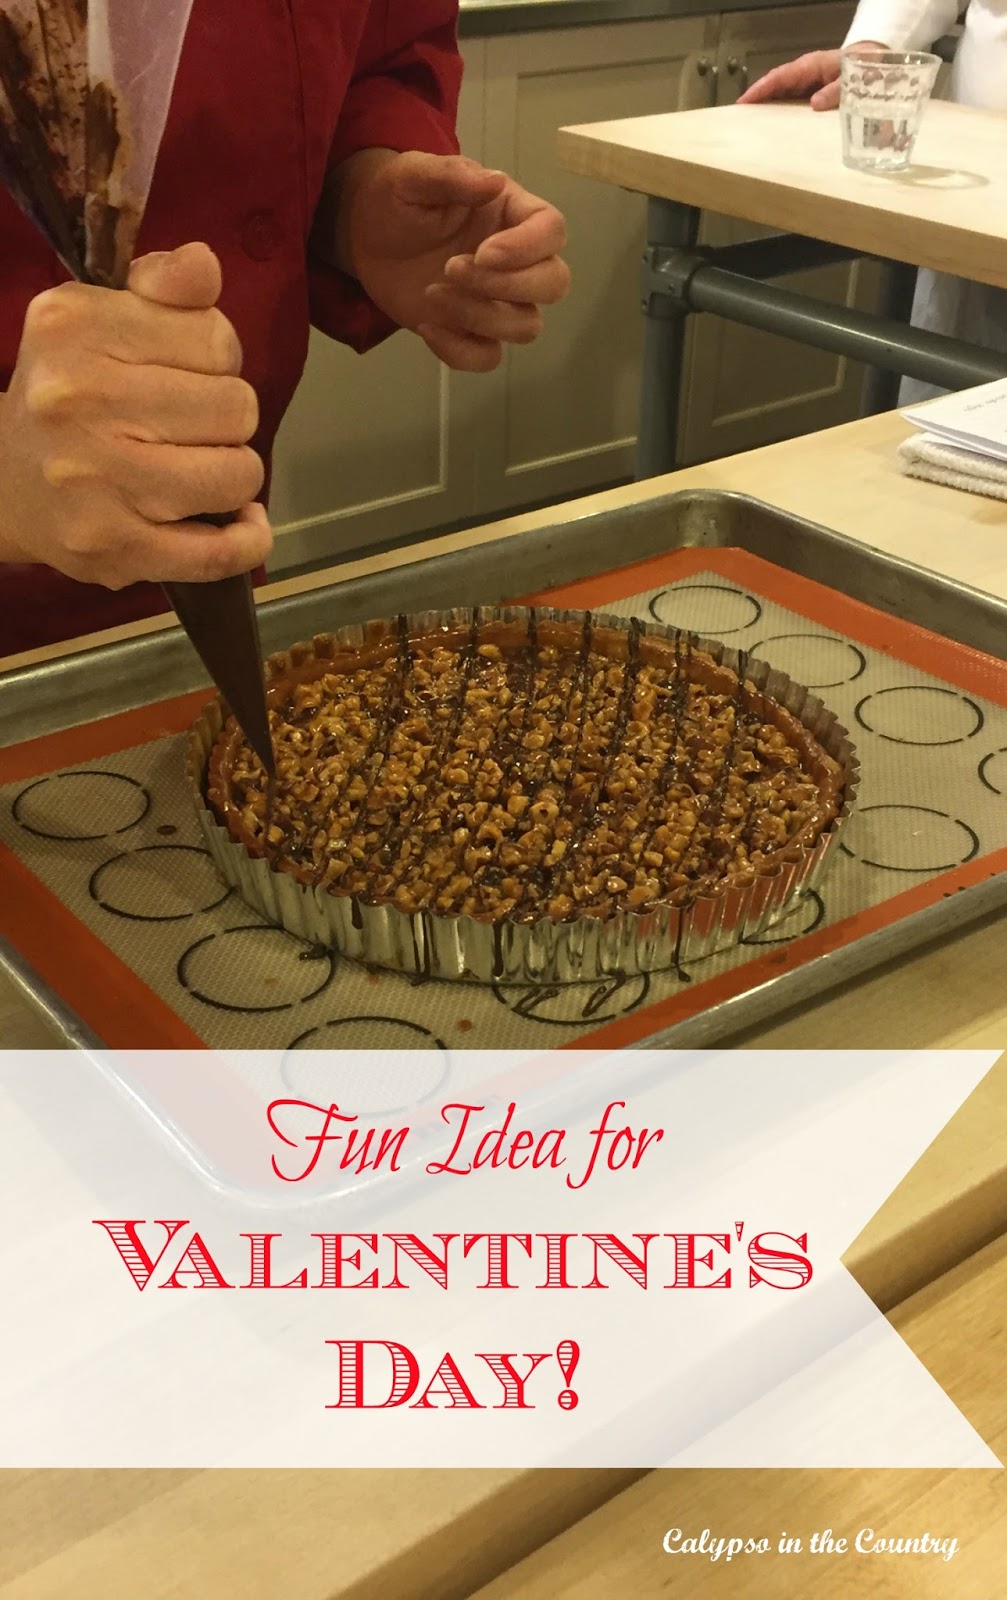 Fun Idea for Valentine's Day - Cooking Class